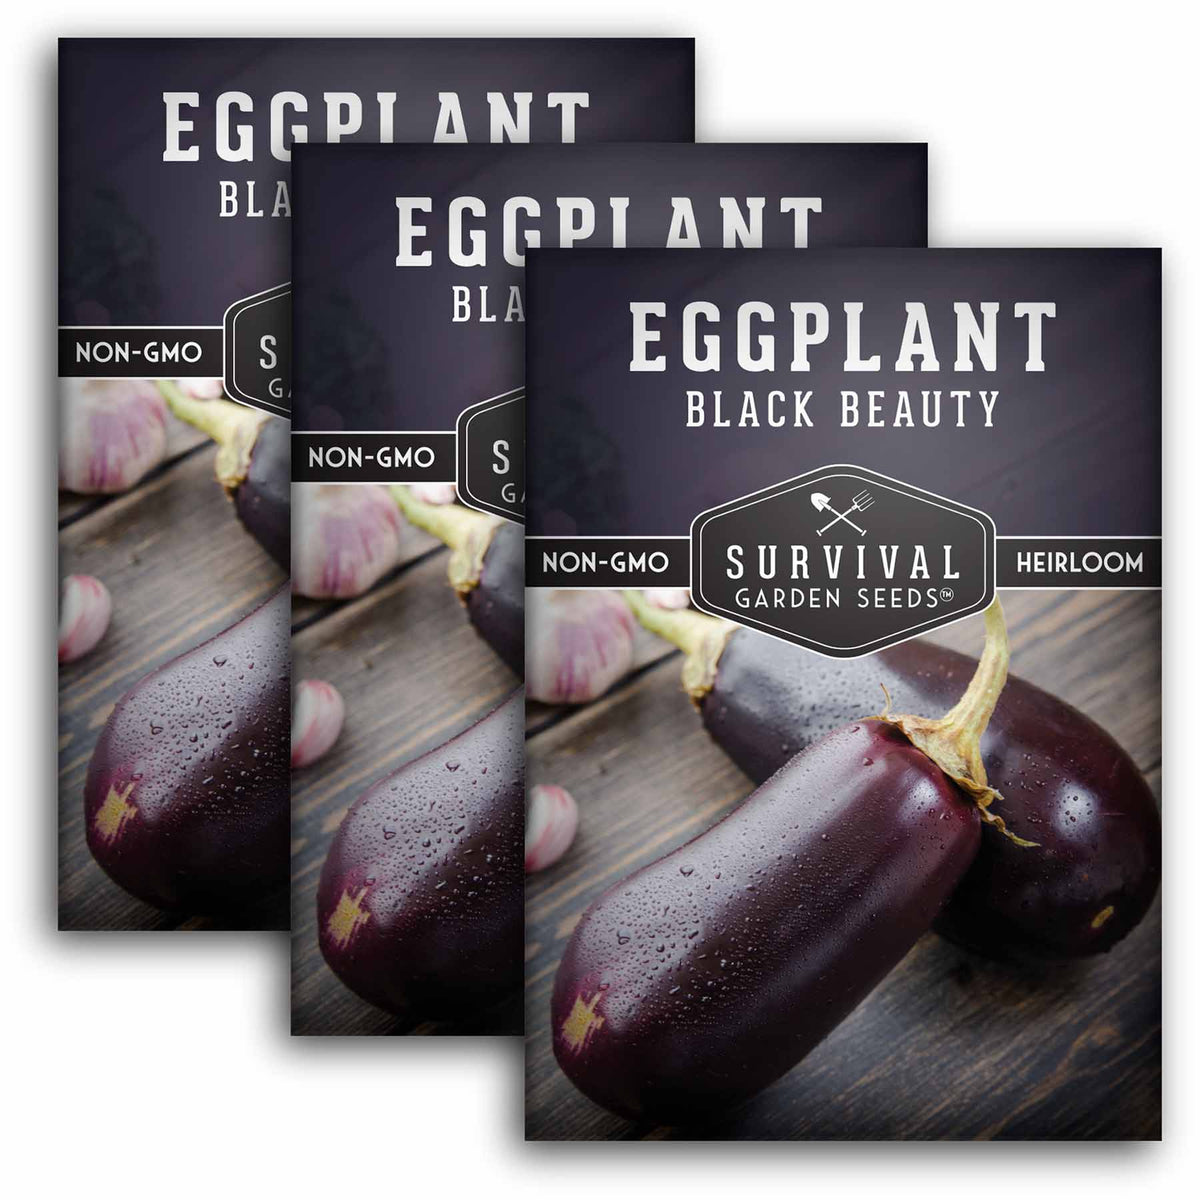 3 packets of Black Beauty Eggplant seeds